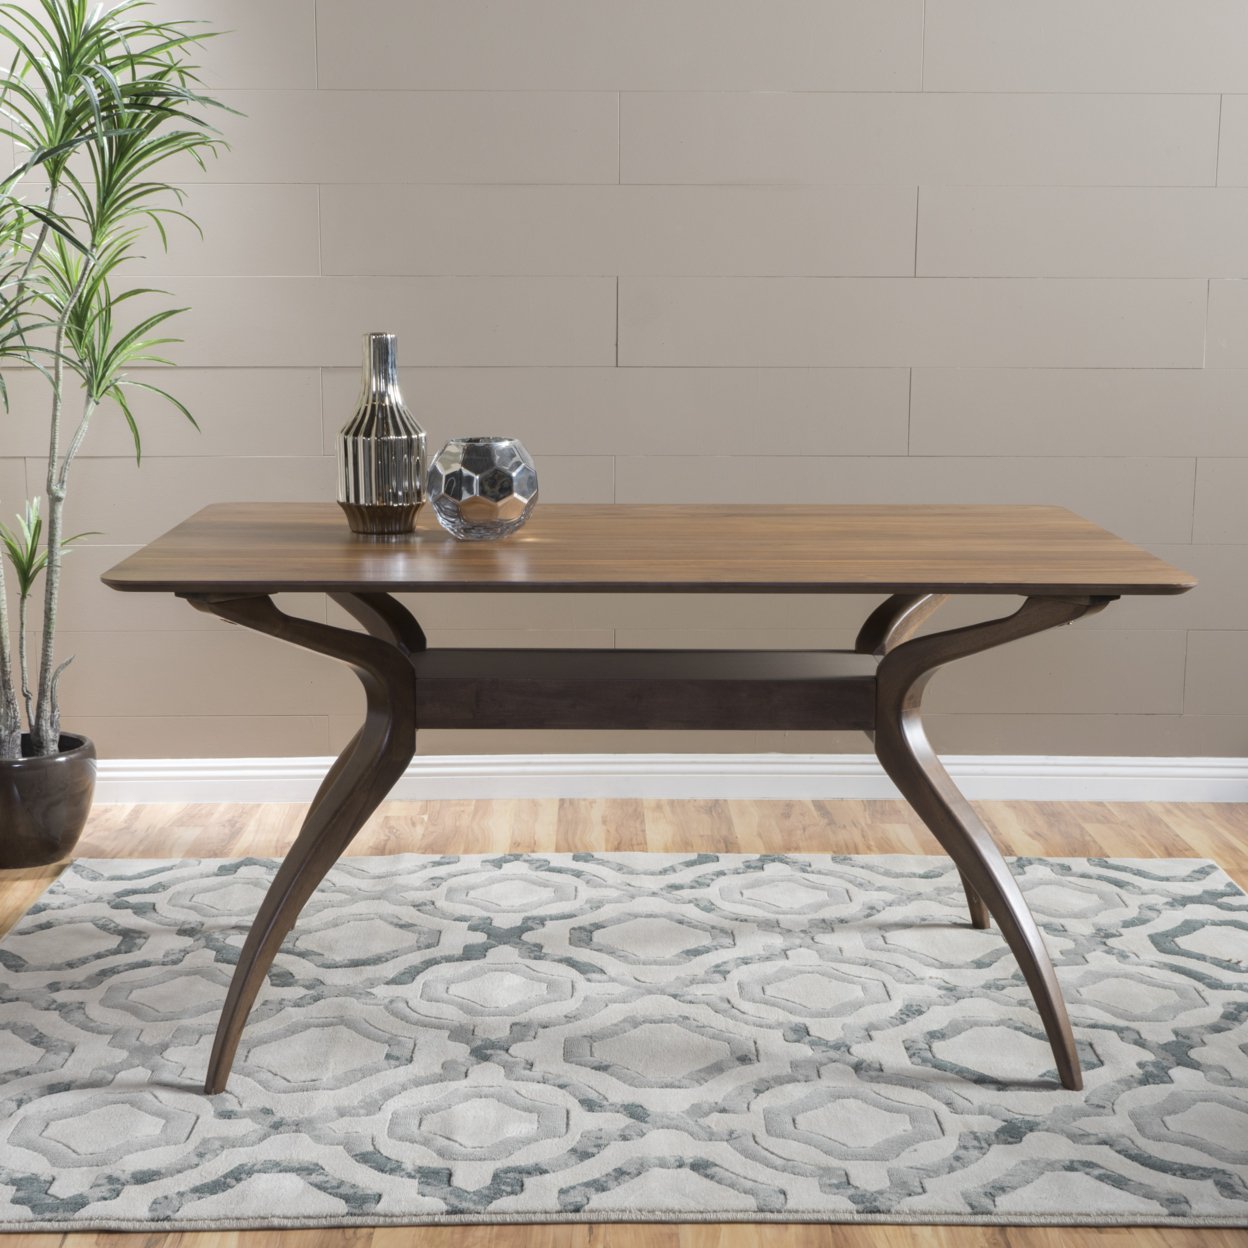 Mabel Wood Dining Table - Natural Walnut